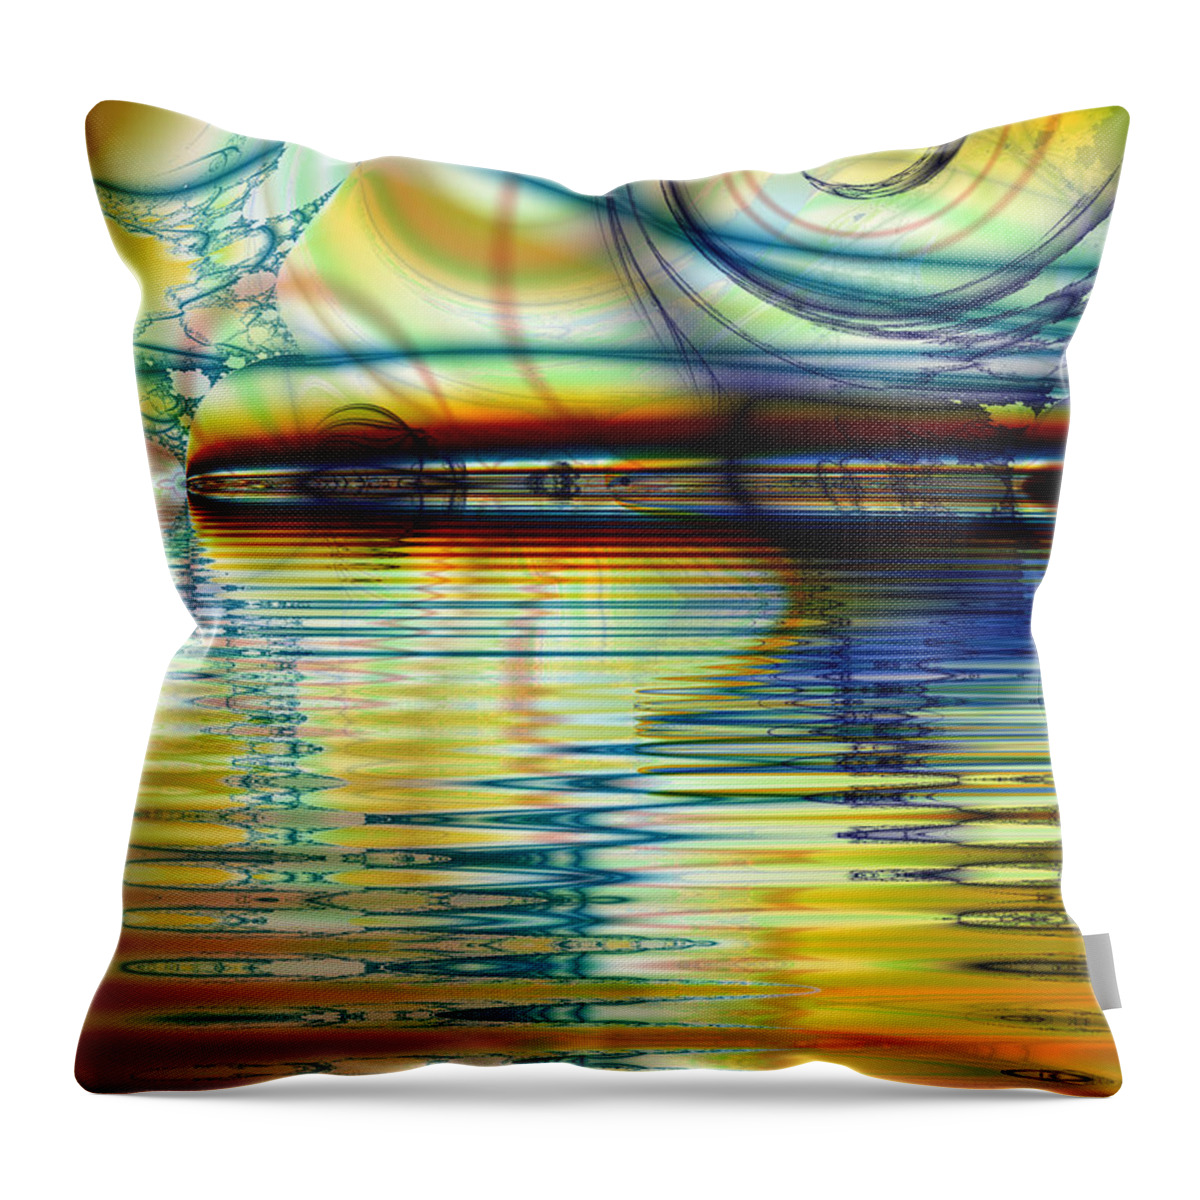 Fractal Throw Pillow featuring the digital art Passion by Debra Martelli